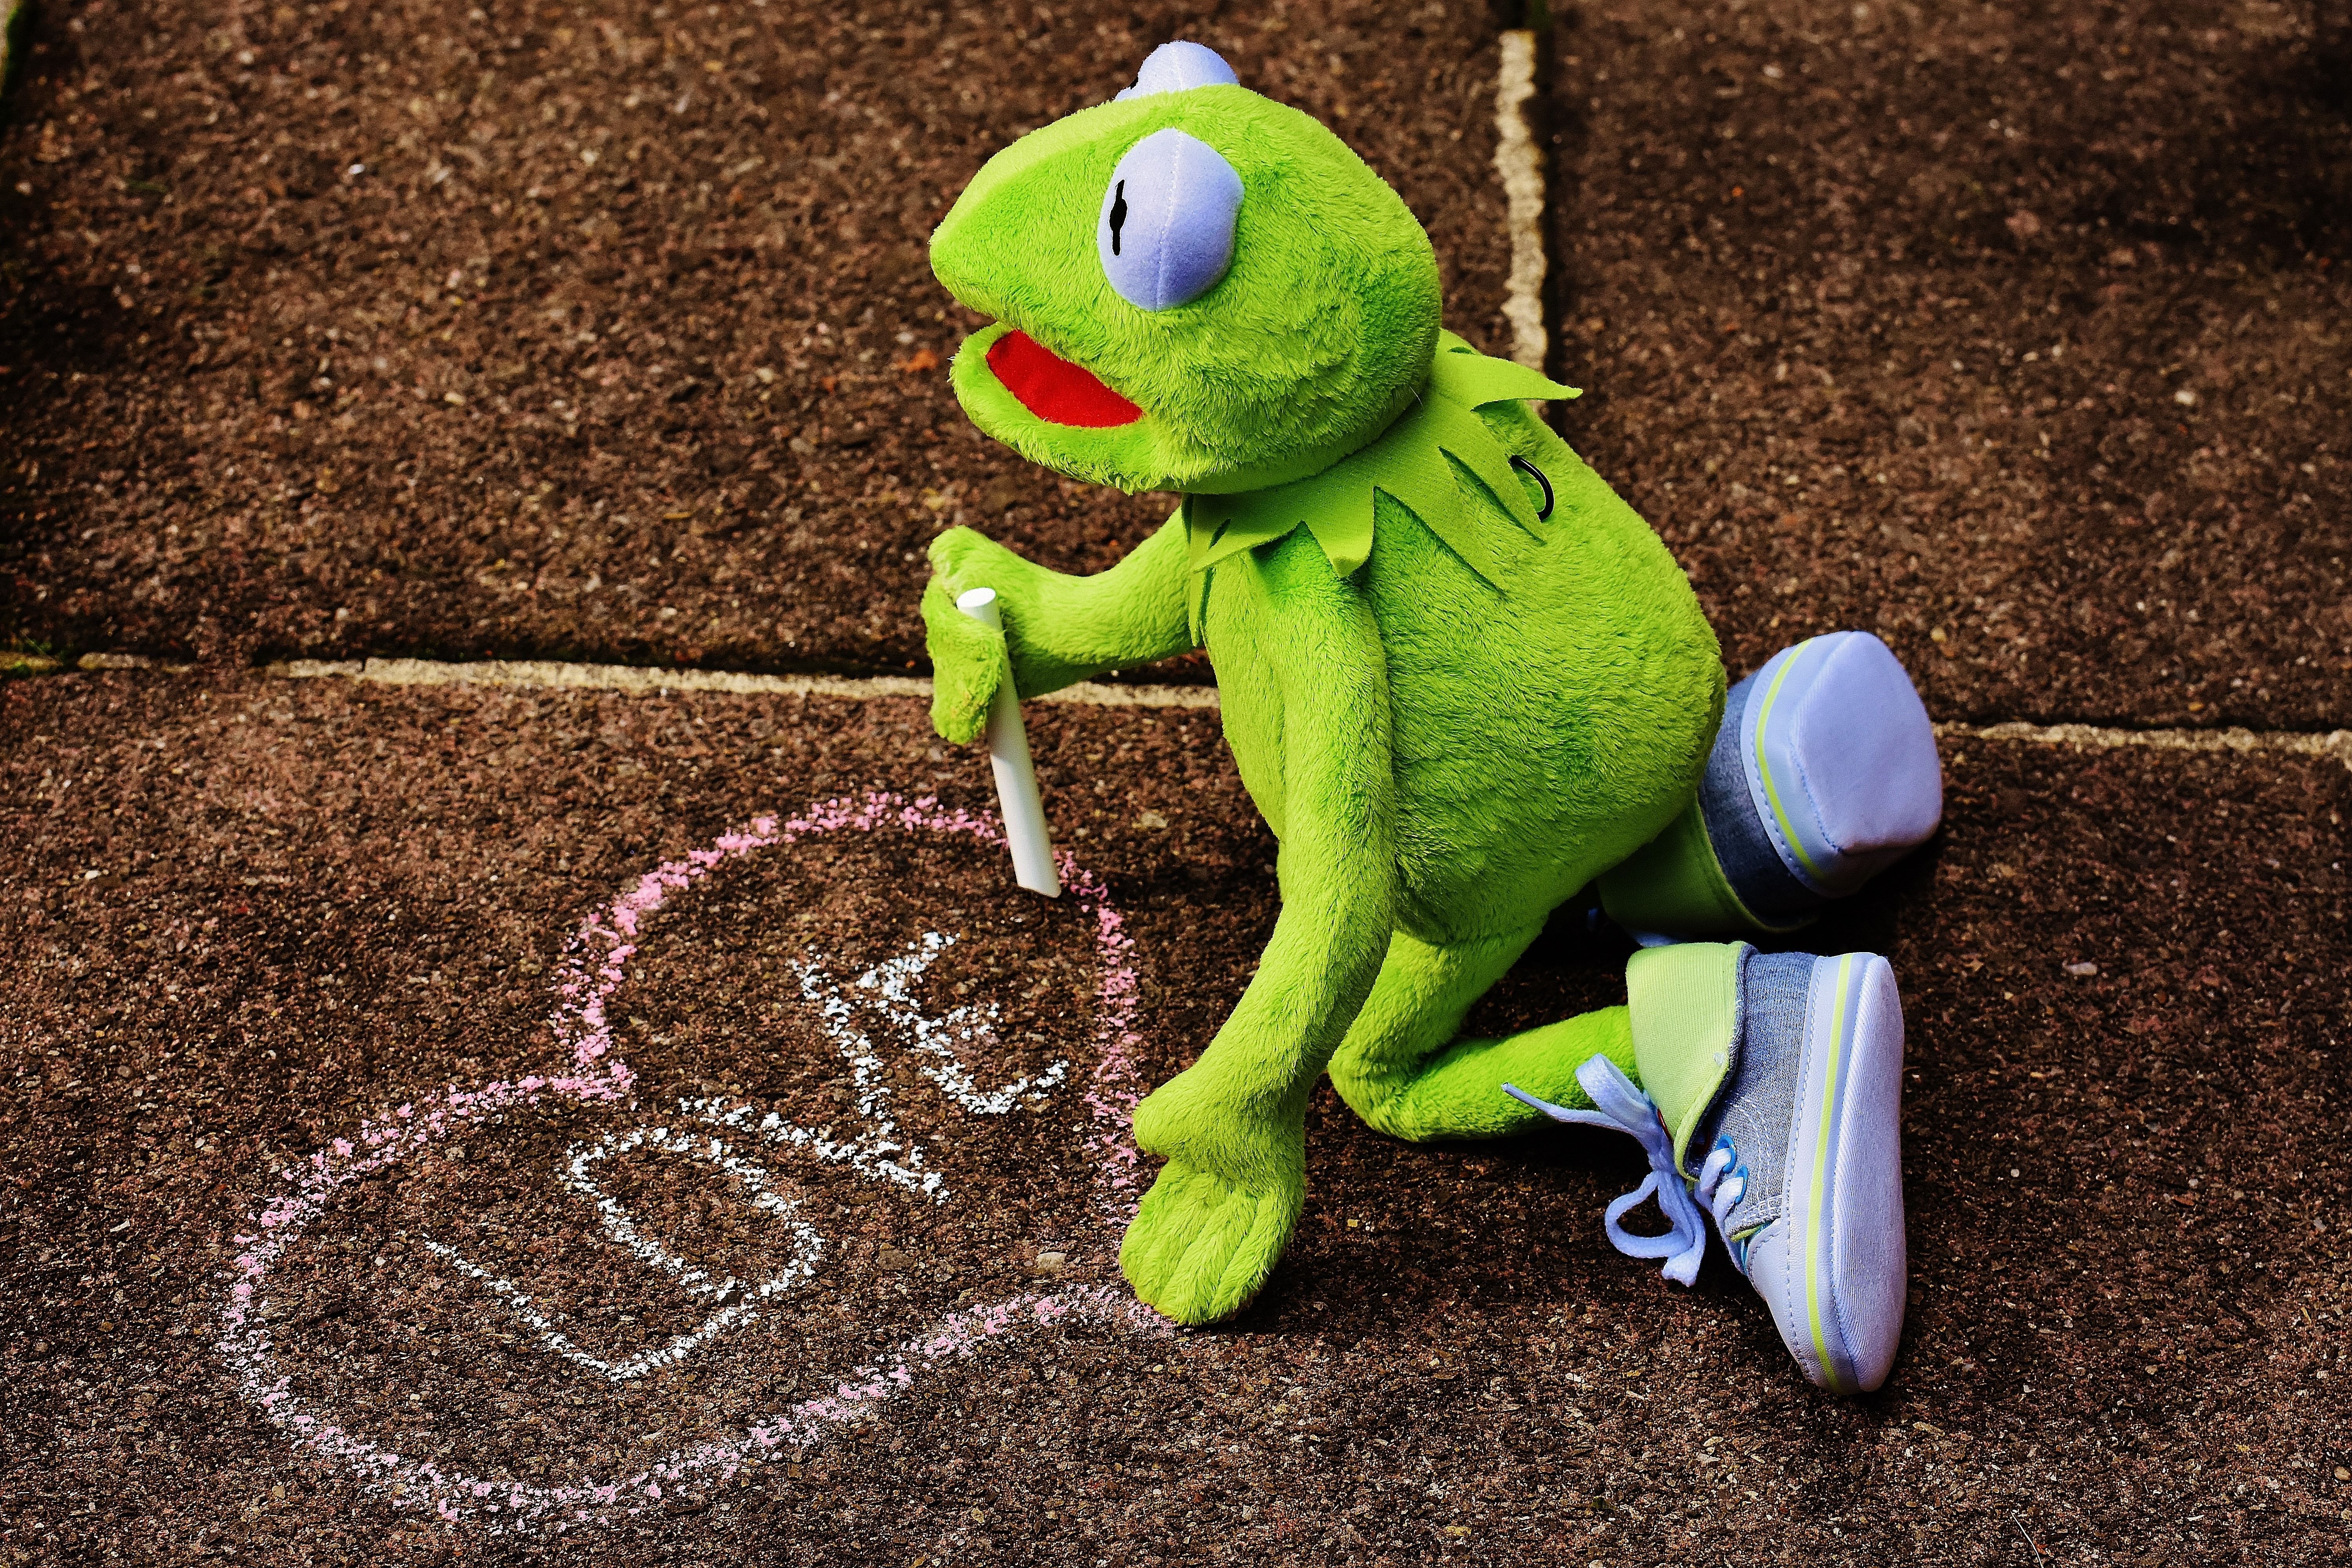 Kermit the Frog drawing a heart with sidewalk chalk. - Kermit the Frog